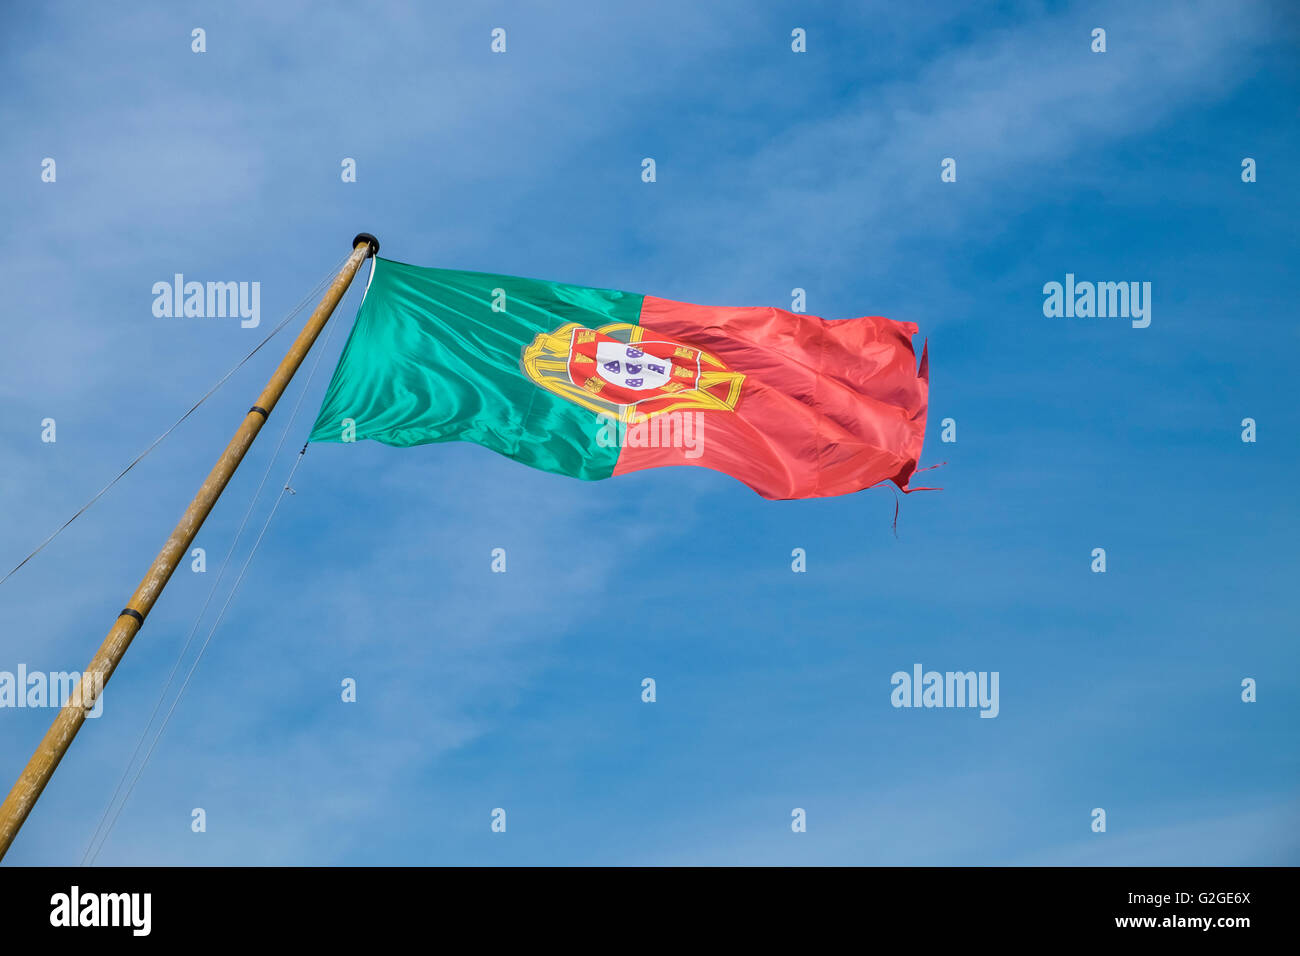 The flag of Portugal, the national flag of the Portuguese Republic. Stock Photo